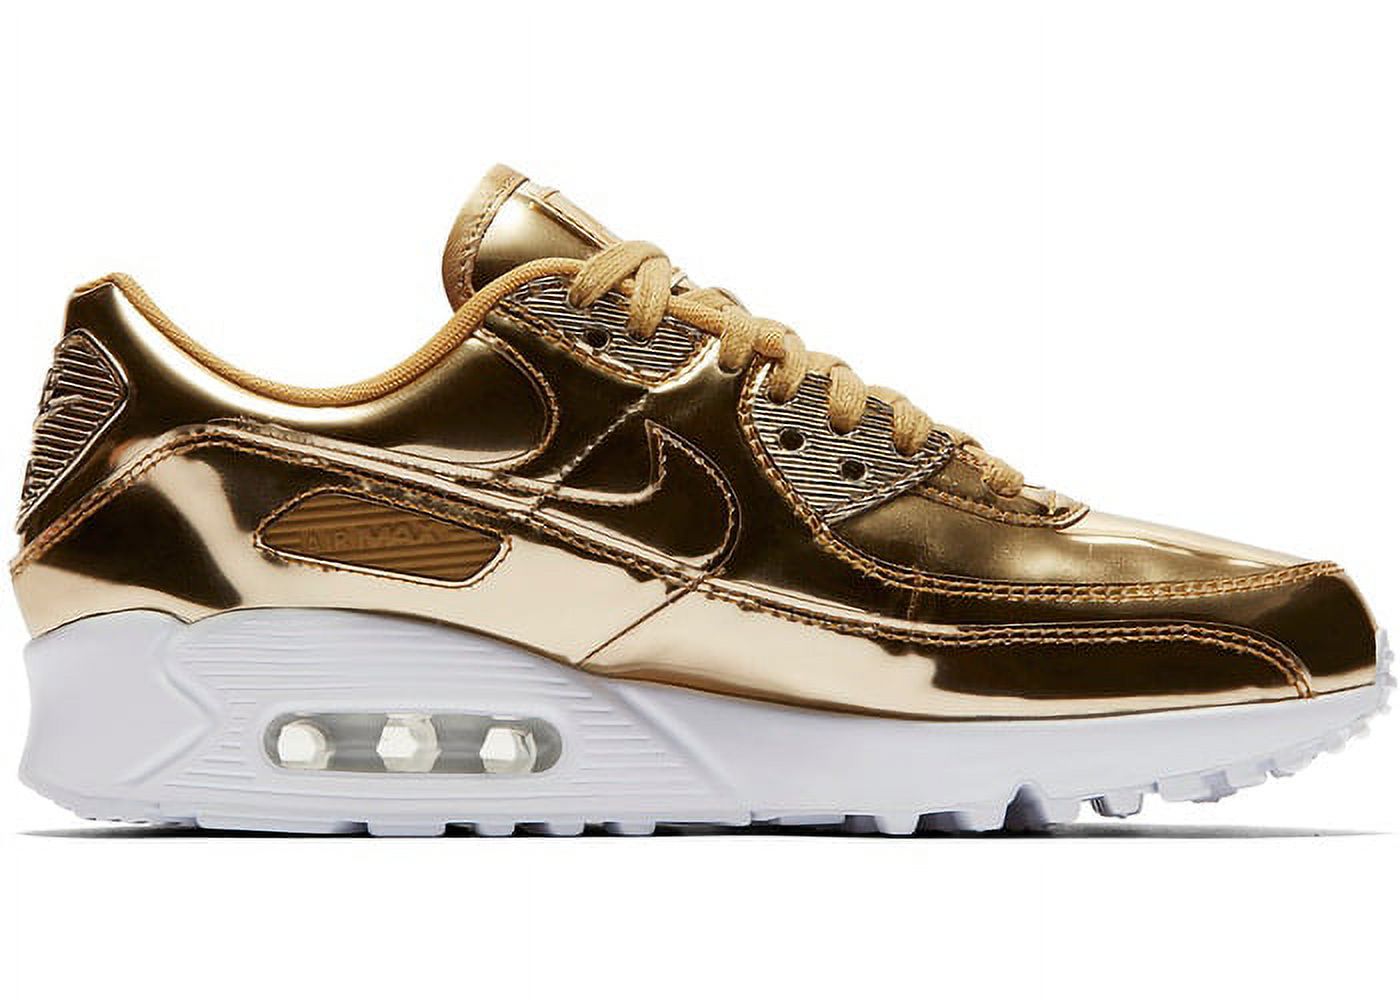 Nike Womens Air Max 90 Sp Running Shoes (5.5) - image 1 of 5